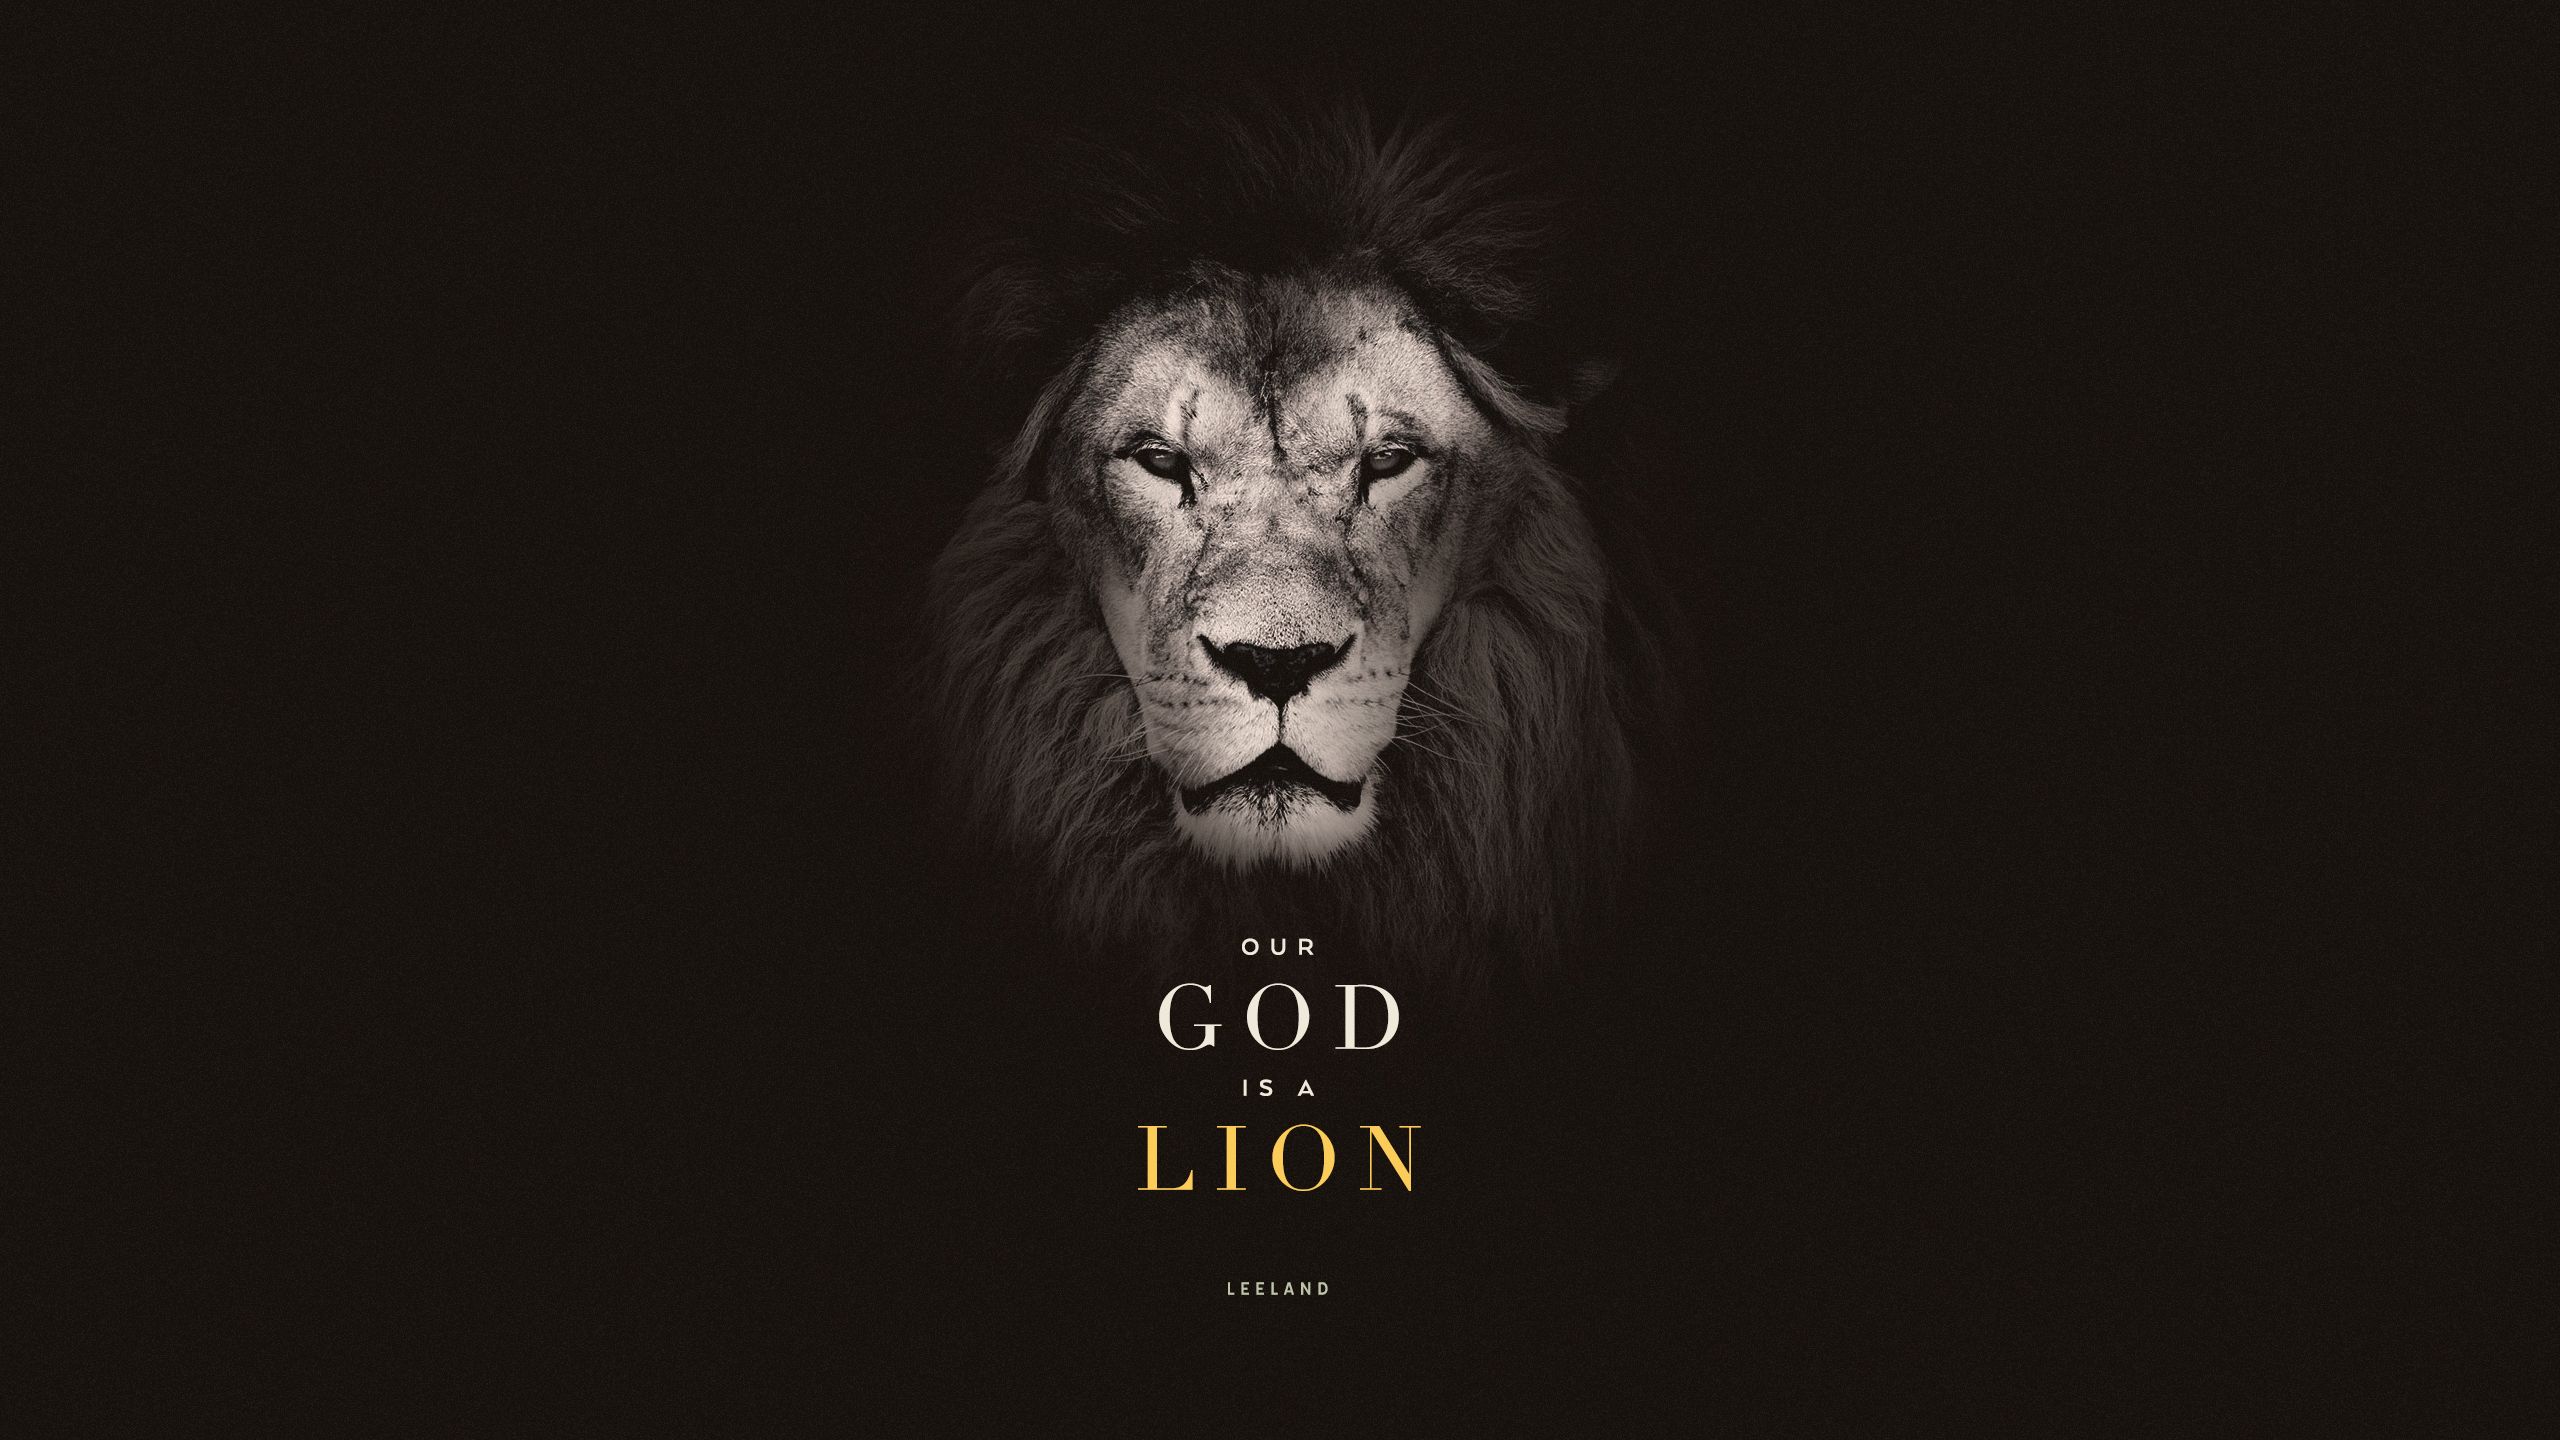 Wednesday Wallpaper: Our God is a Lion